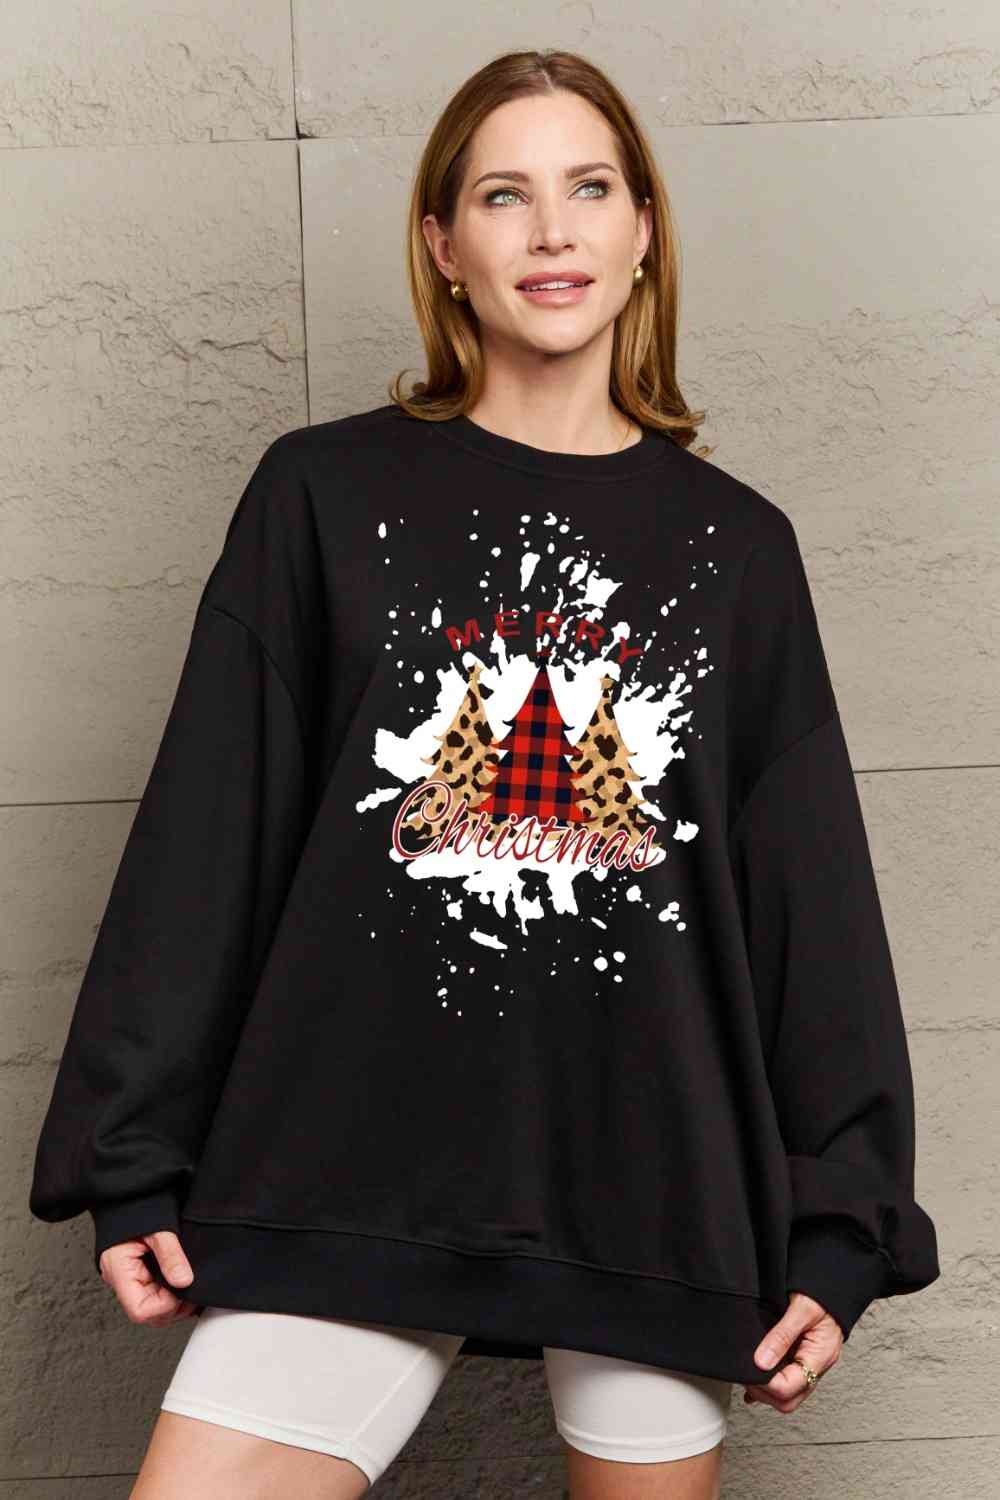 Simply Love Full Size MERRY CHRISTMAS Graphic Sweatshirt - Guy Christopher